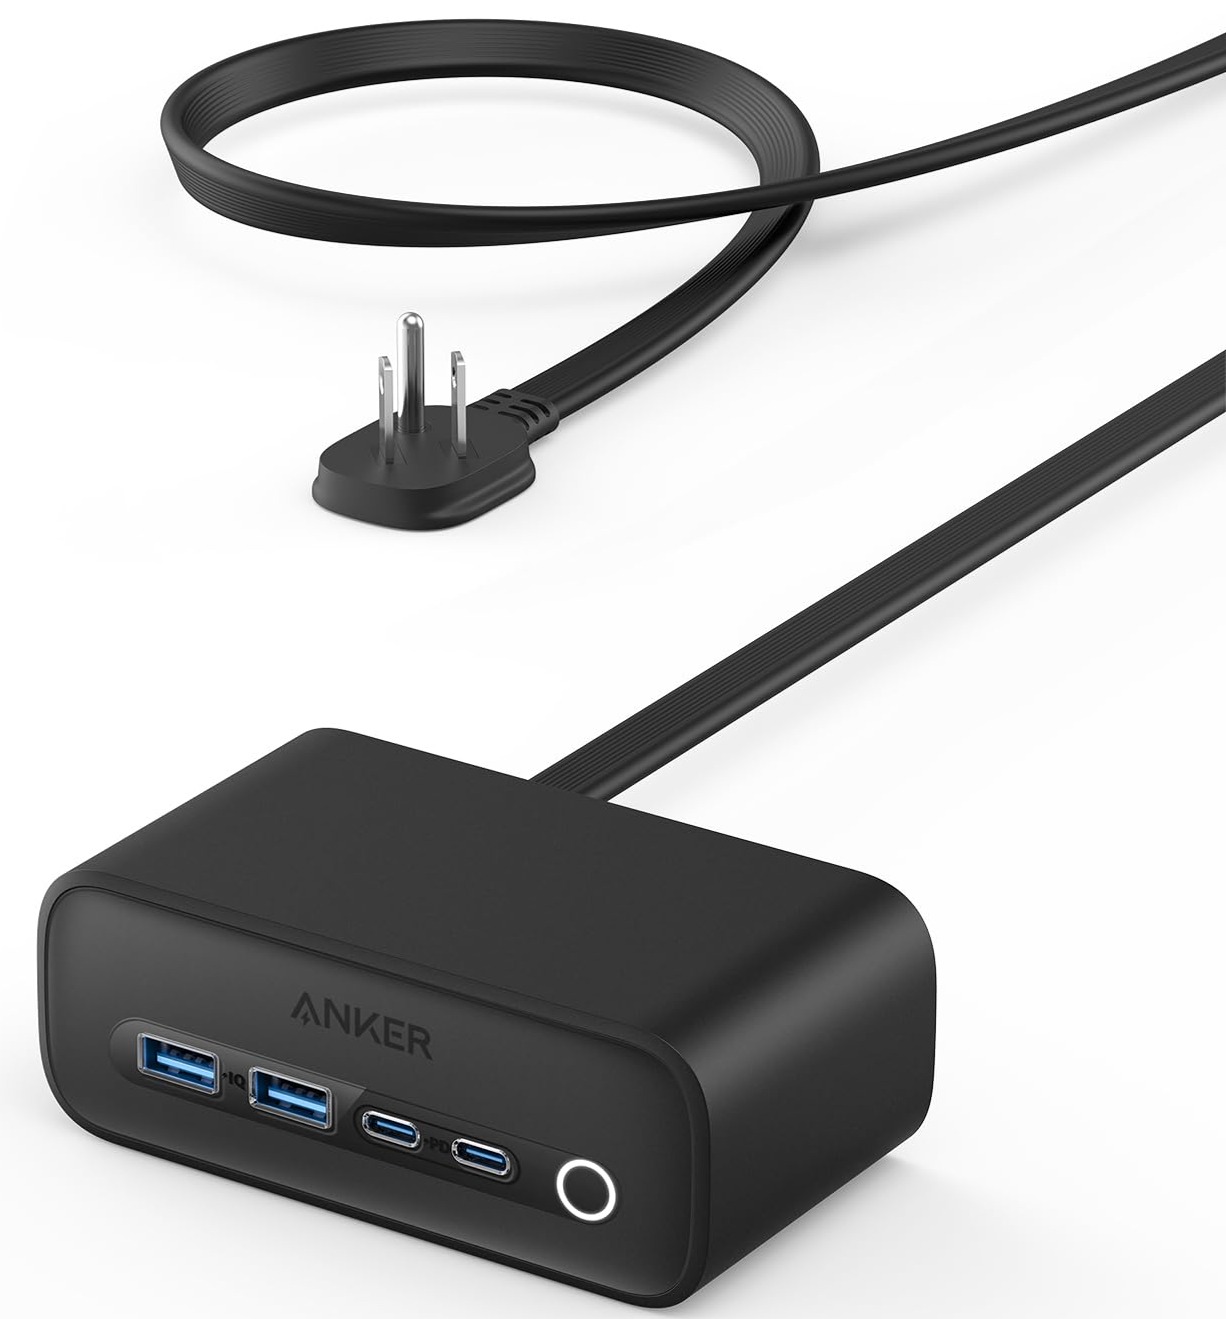 $40.99 (Prime Members): Anker 525 Charging Station, 7-in-1 USB C Power Strip for iPhone 15/14, 5 ft Thin Cord and Flat Plug, 3 AC, 2 USB A, 2 USB C,65W Power Delivery